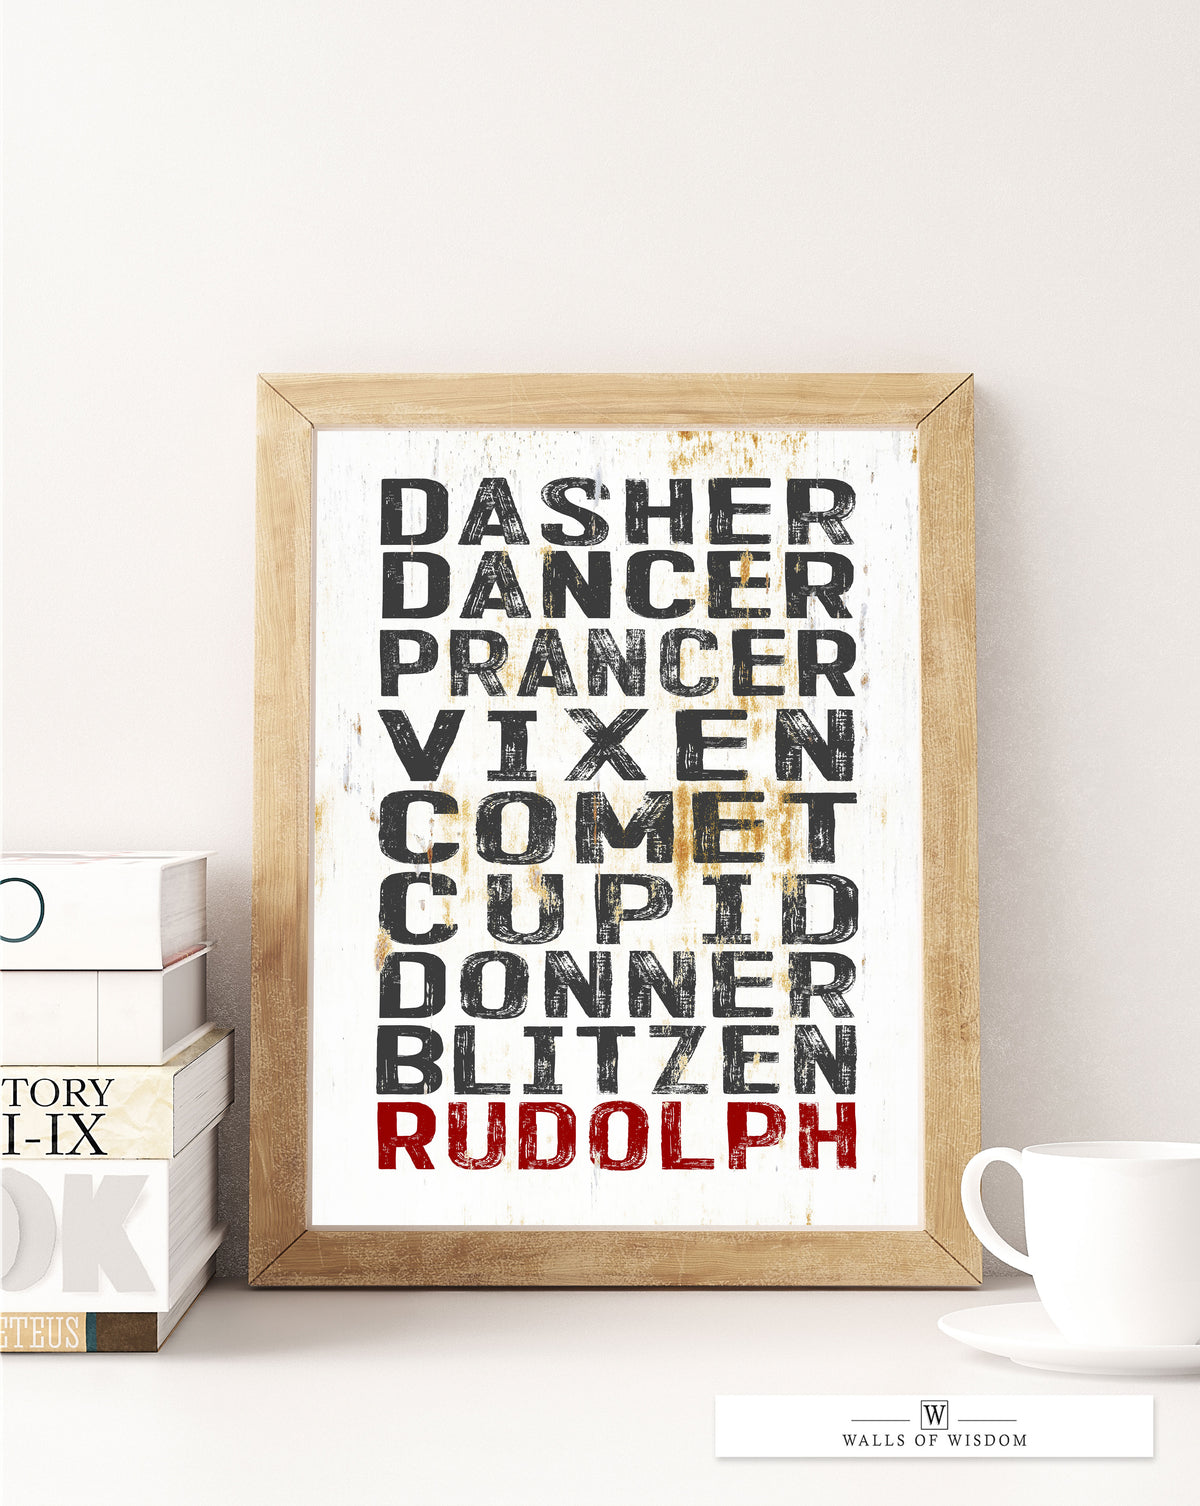 Reindeer Roll Call Poster Print: Distressed White Metal-Styled Christmas Wall Art for Cozy, Contemporary Spaces